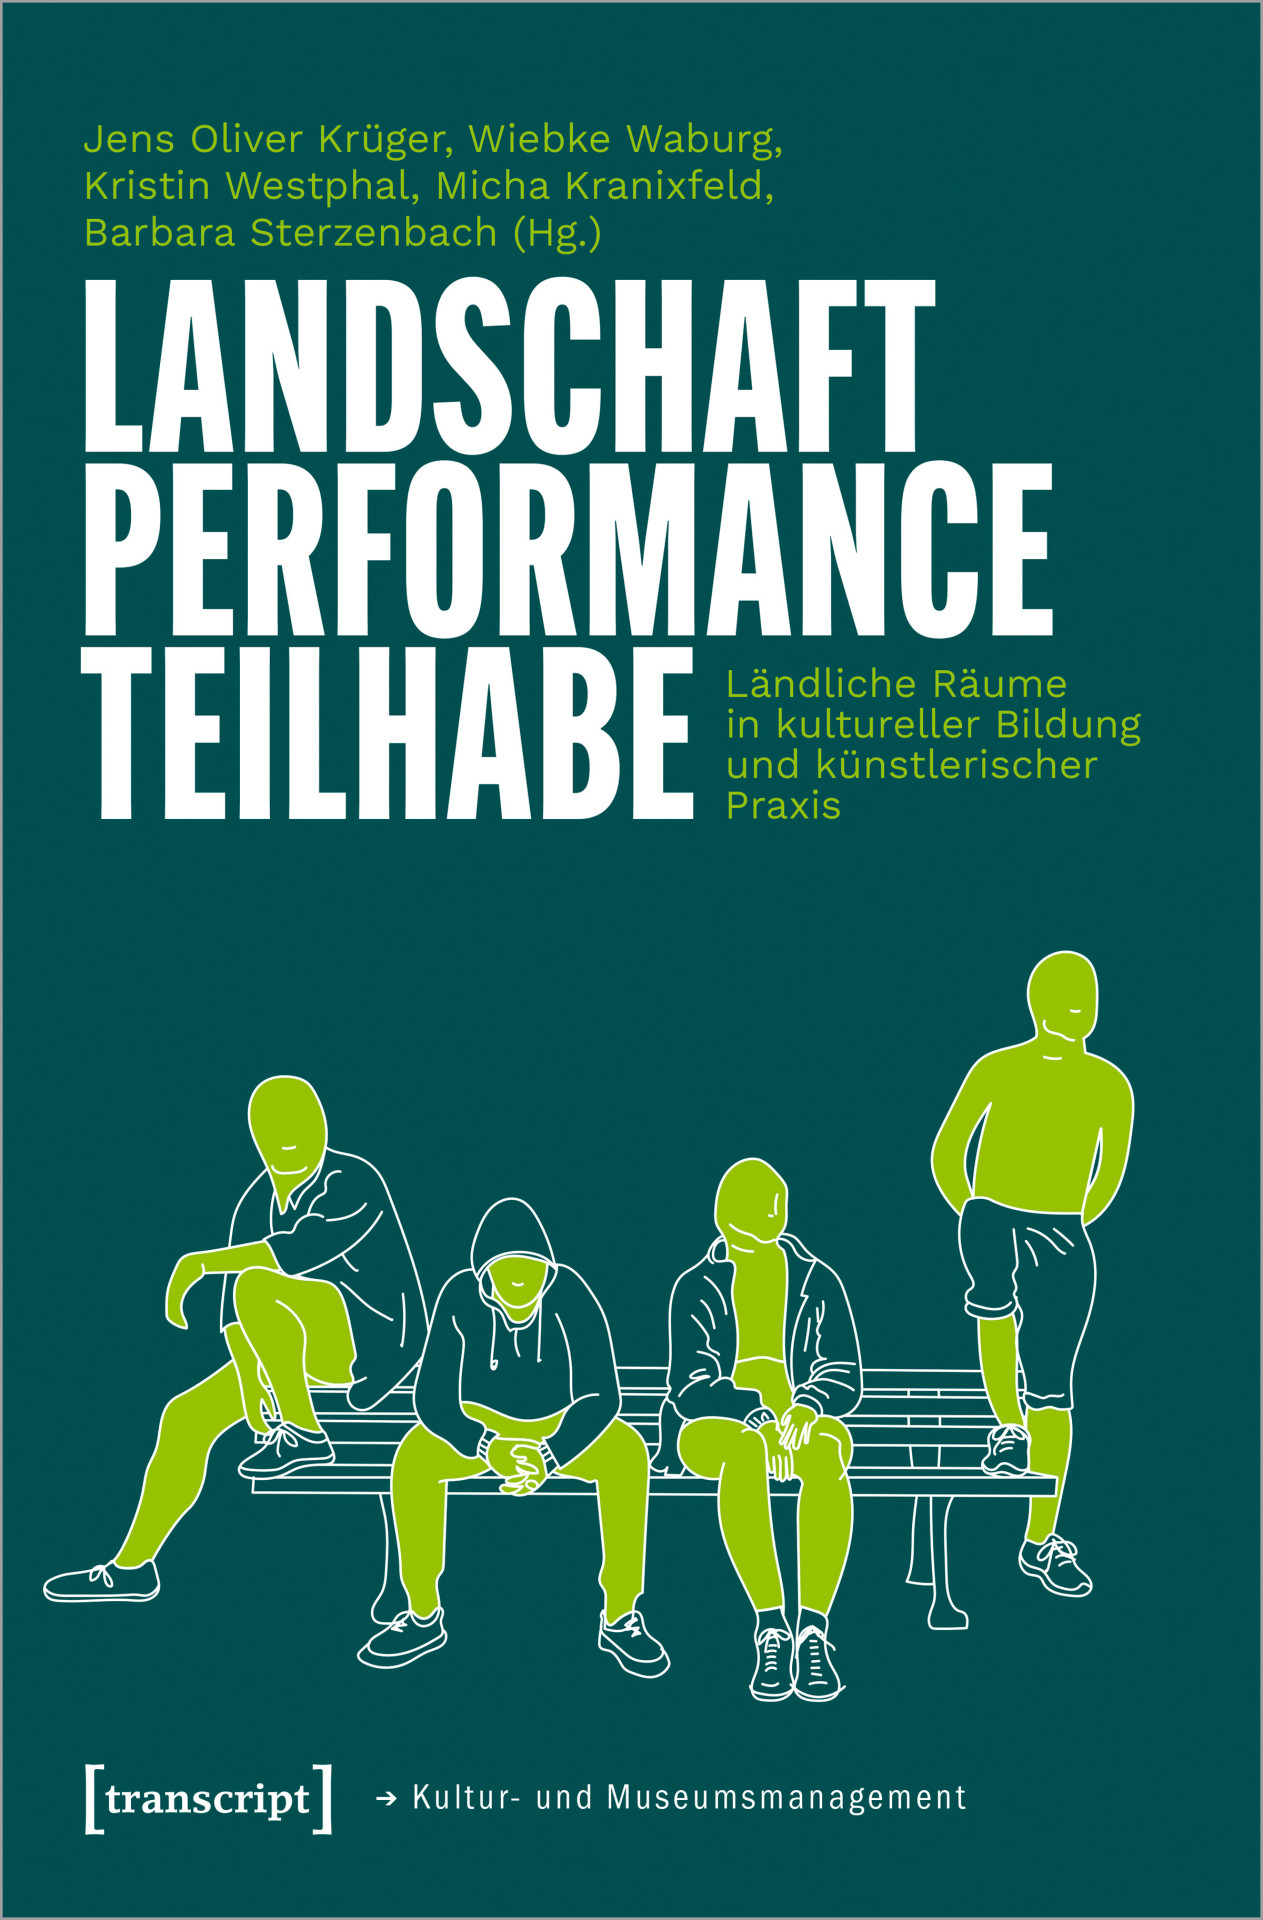 Contribution by Lissy Willberg in “Landscape–Performance–Participation” published by transcript